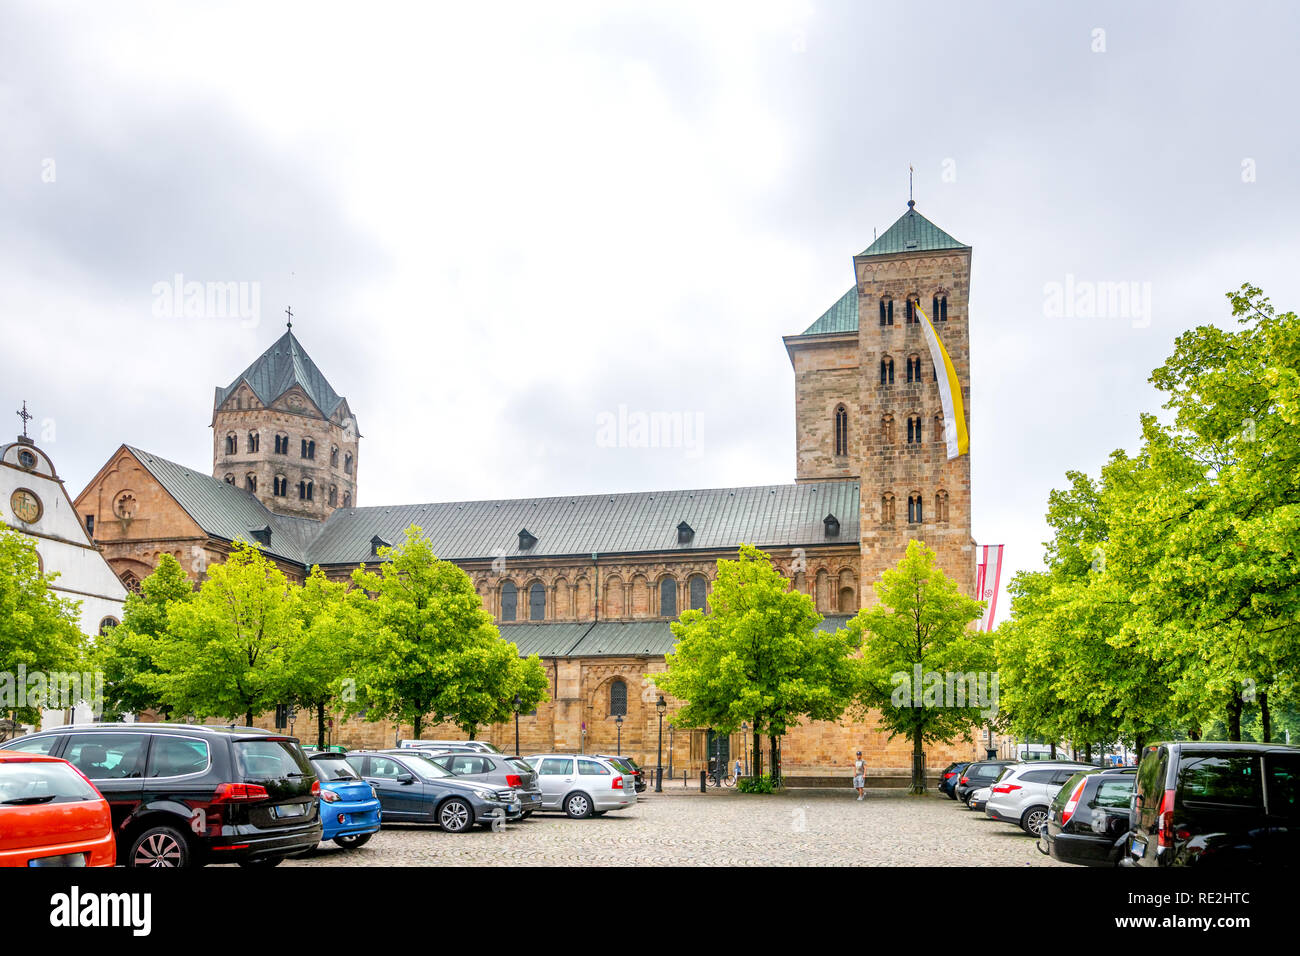 Cathedral in Osnabrück, Germany Stock Photo